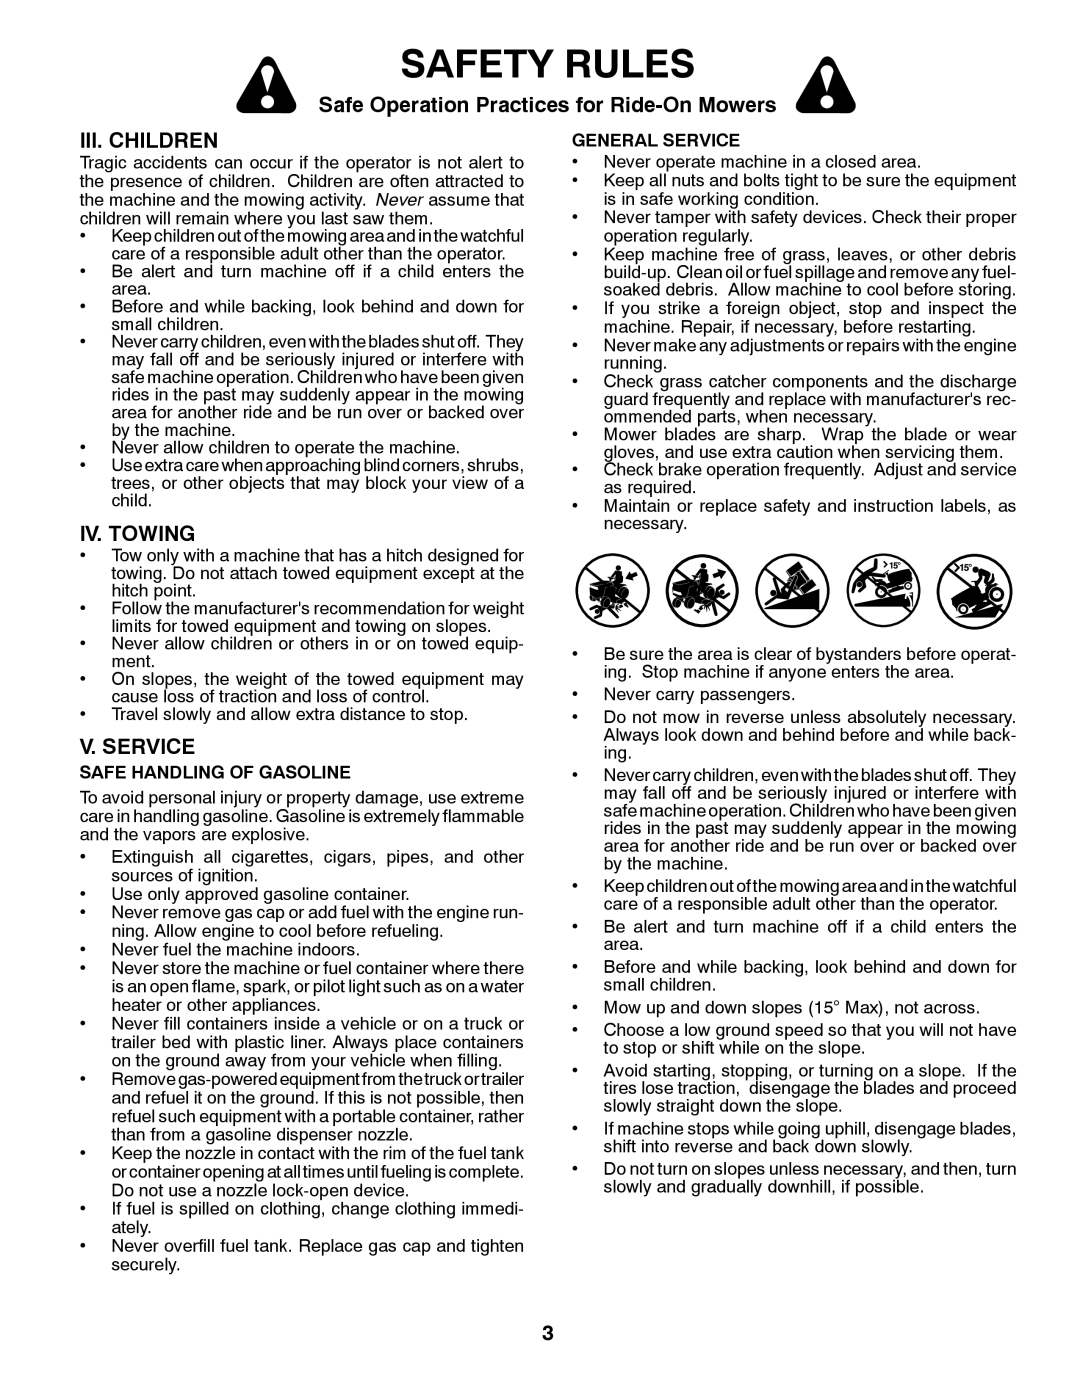 Husqvarna YTH2246 Iii. Children, Iv. Towing, V. Service, Safety Rules, Safe Operation Practices for Ride-On Mowers 